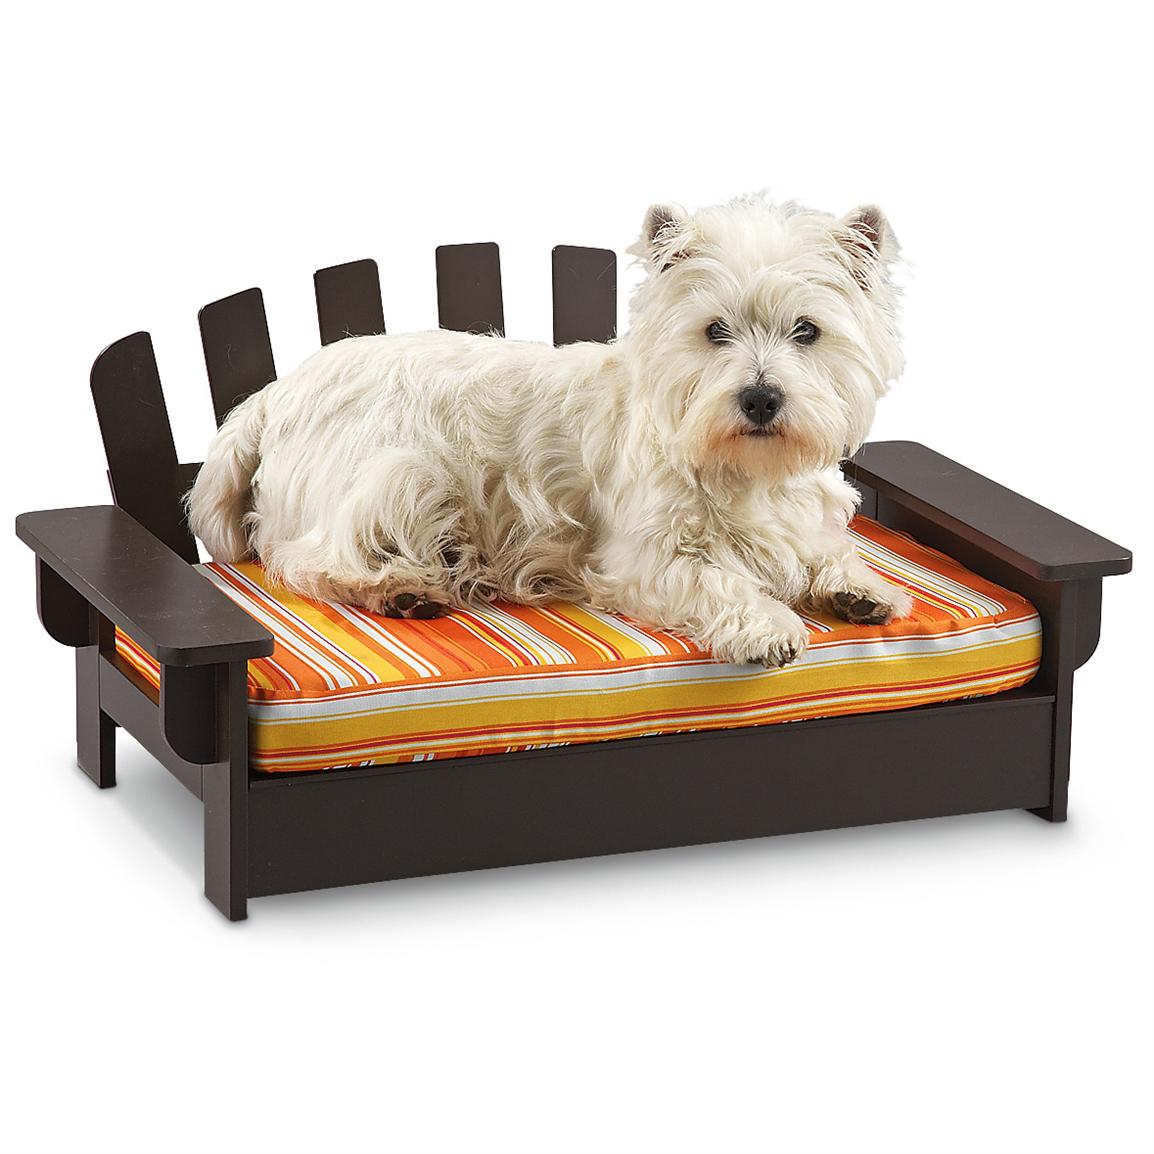 Wood Adirondack Pet Bed - 221570, Kennels & Beds at Sportsman's Guide